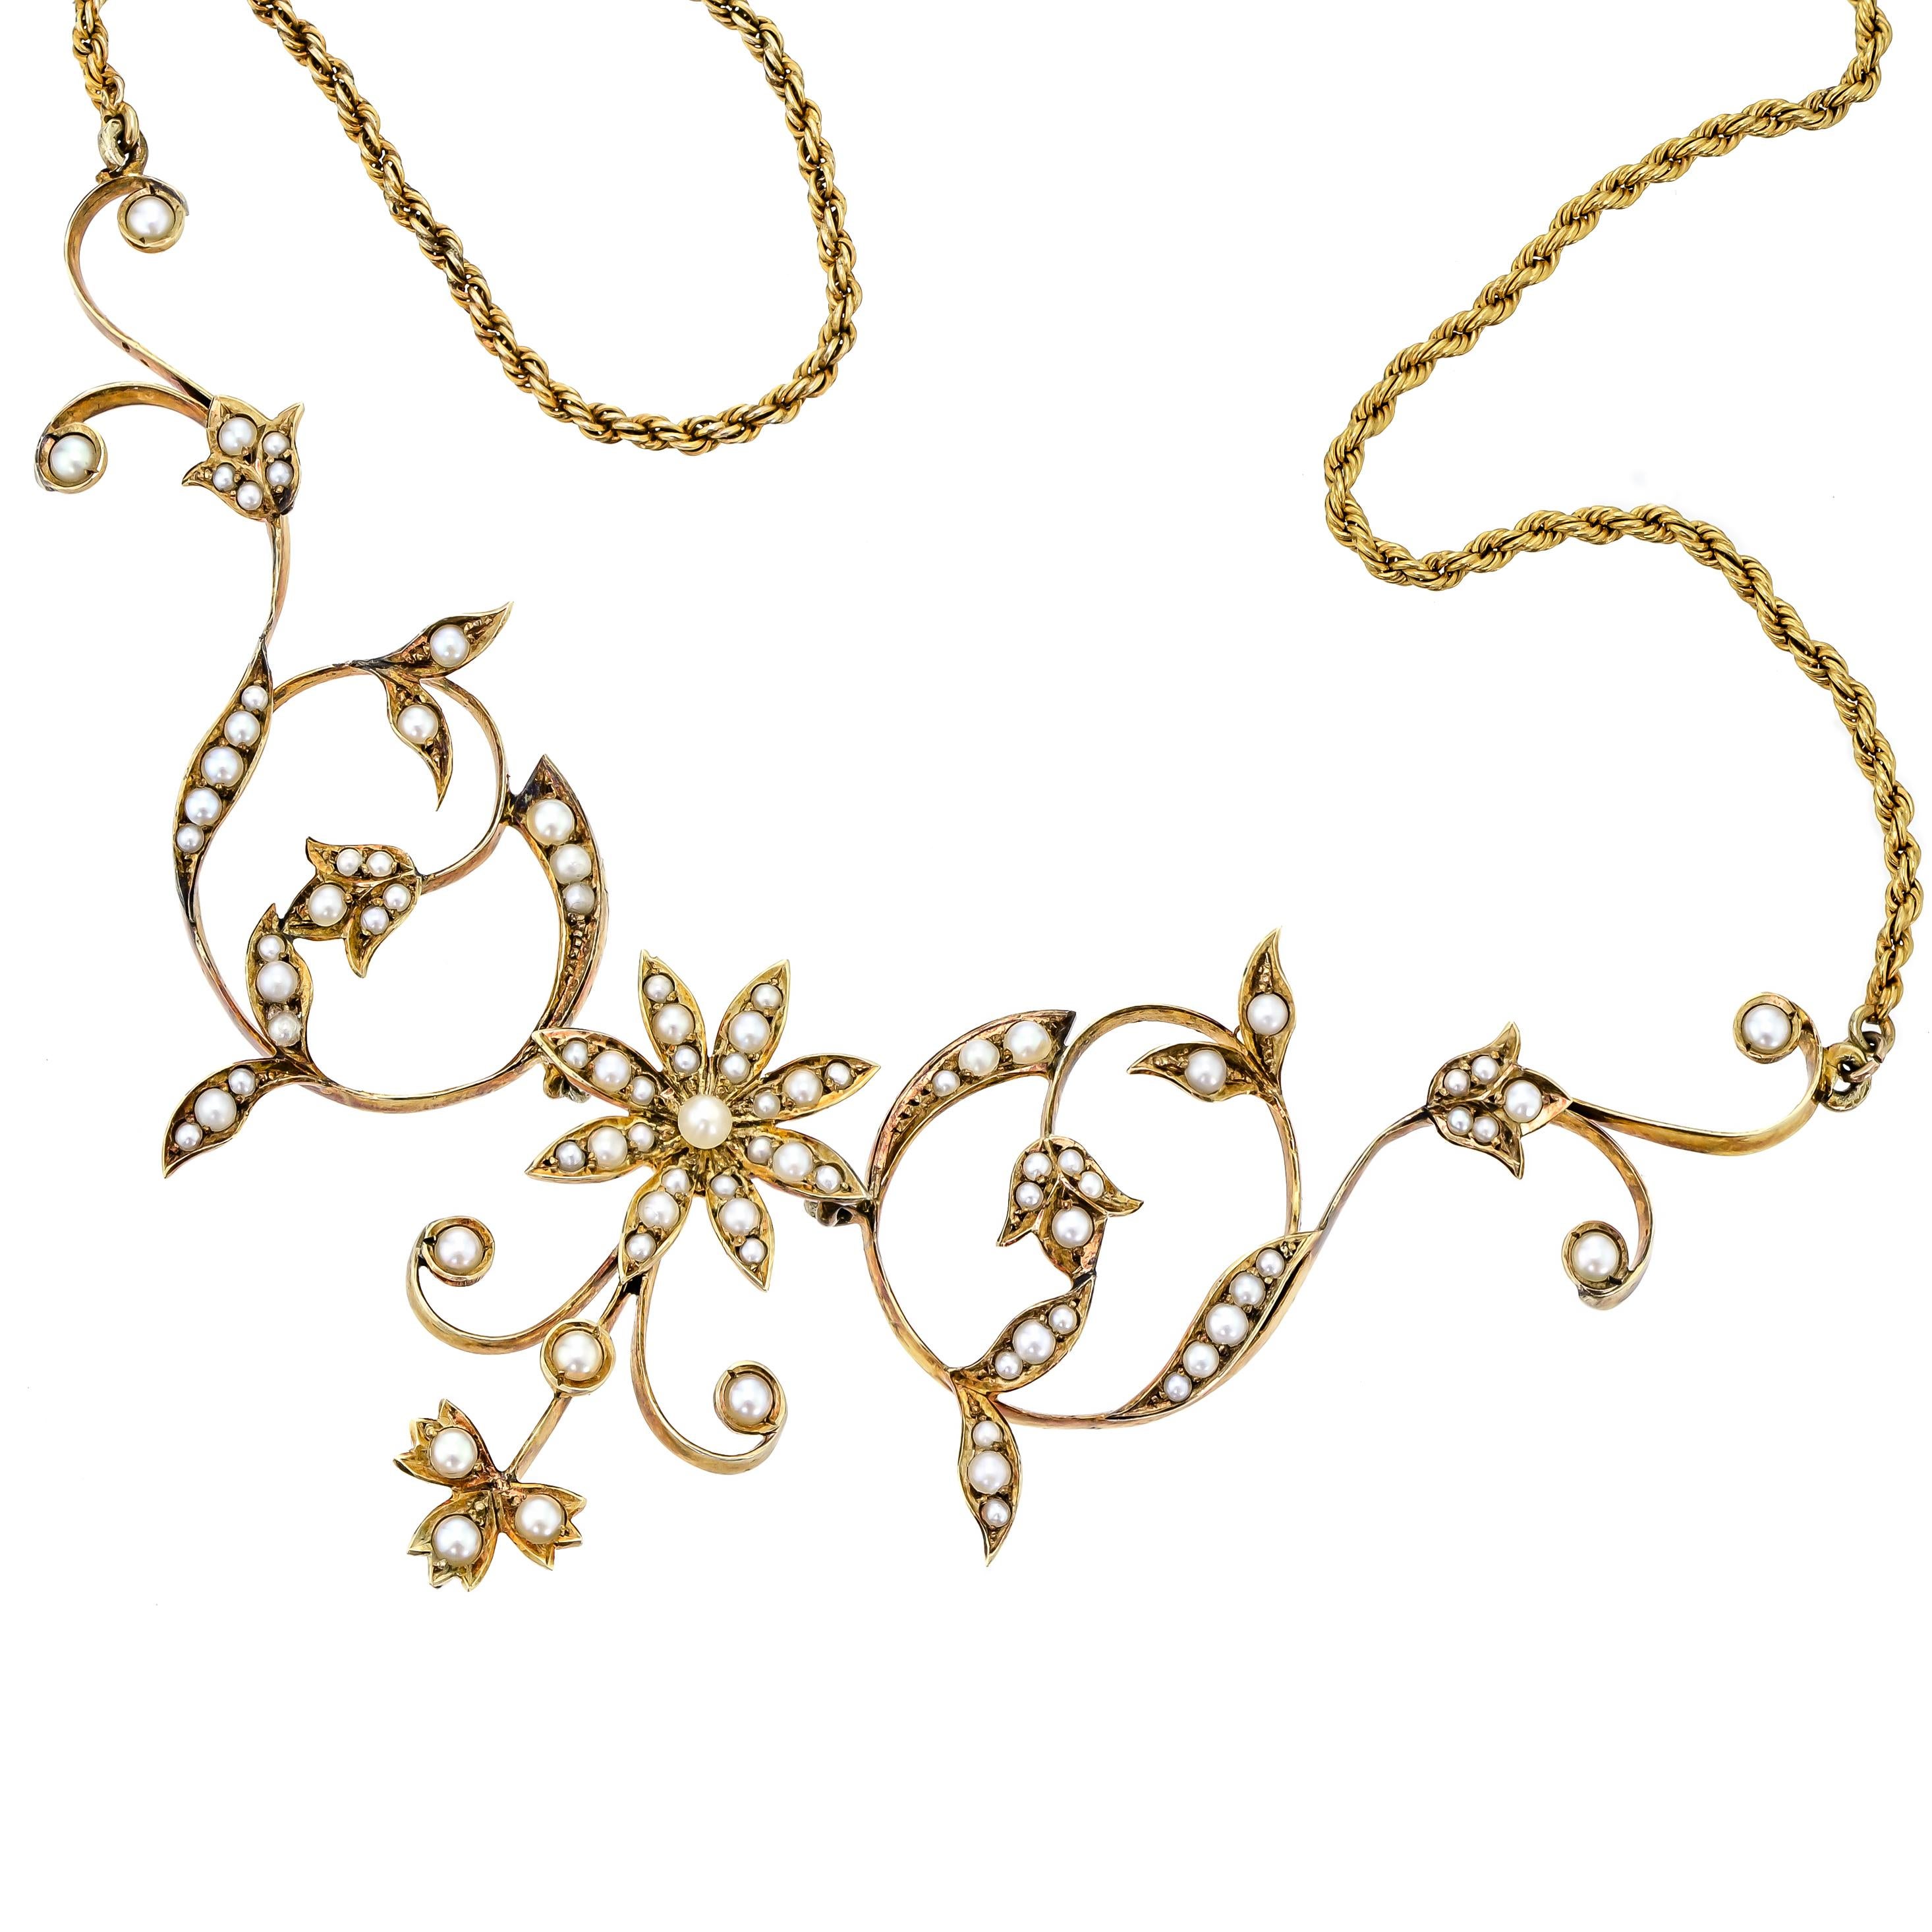 This beautiful and feminine antique Edwardian 14kt yellow gold pearl floral necklace contains numerous small pearls set into a foliate and floral motif displaying elegant Edwardian design characteristics. The stunning floral motif is crafted into a